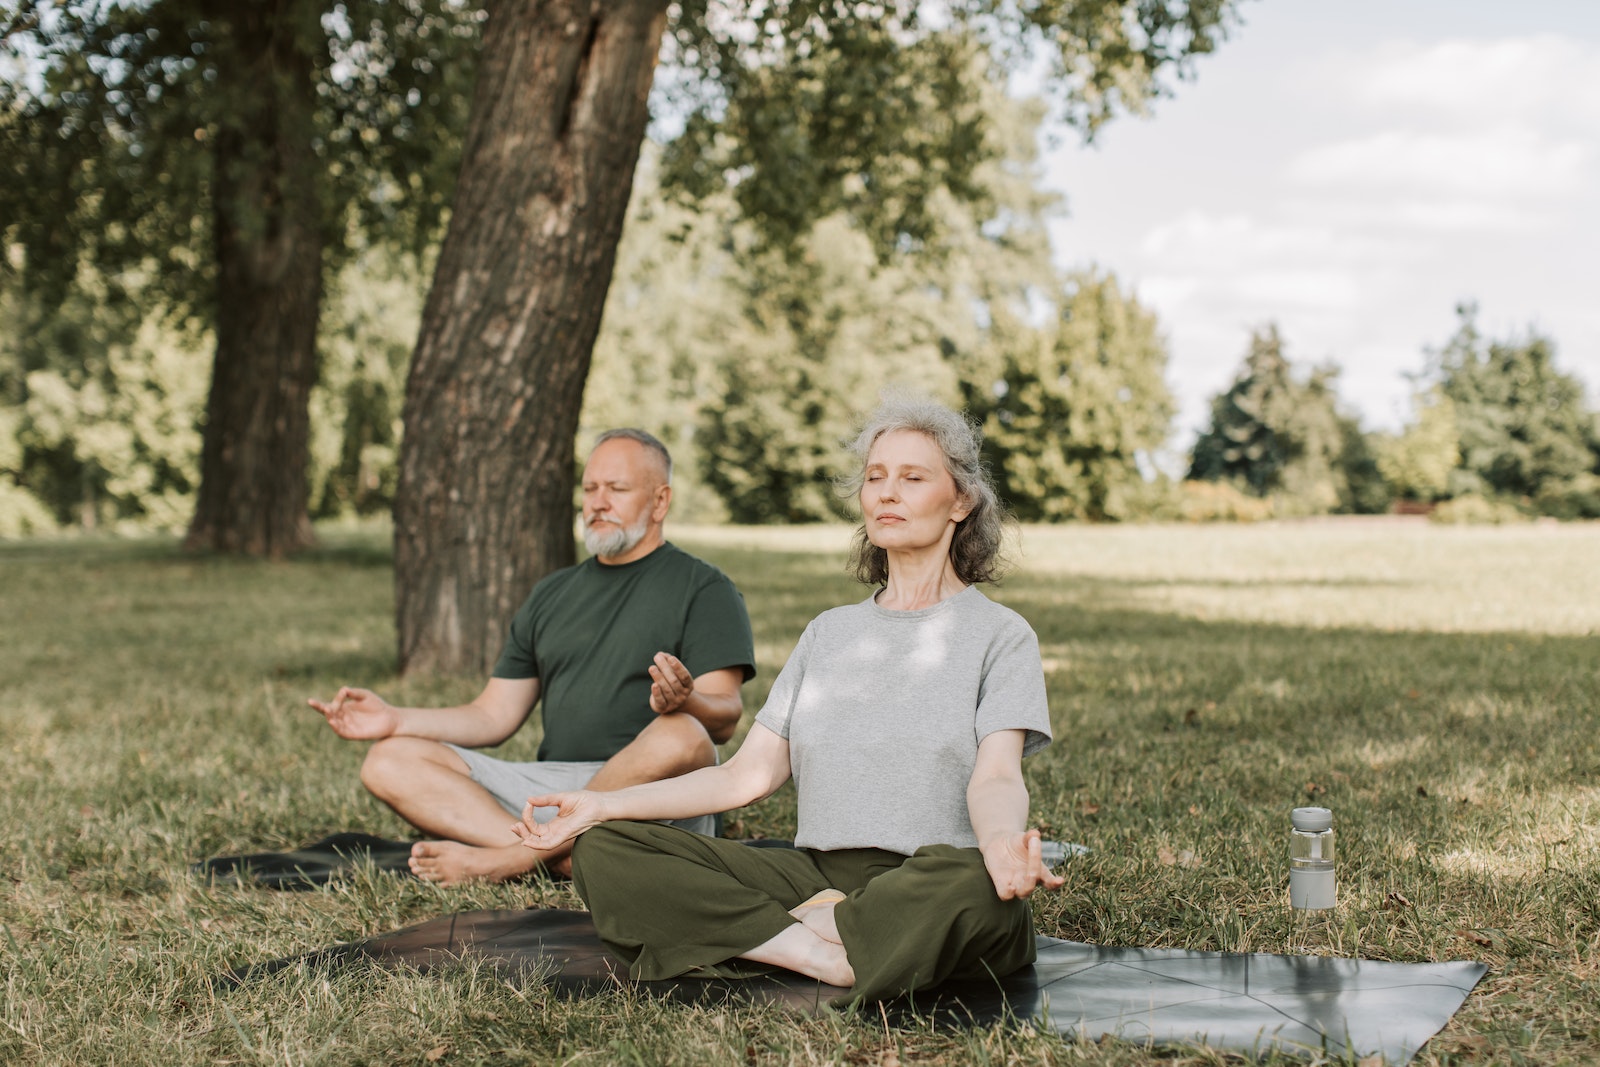 An Elderly Couple Meditating in the Park